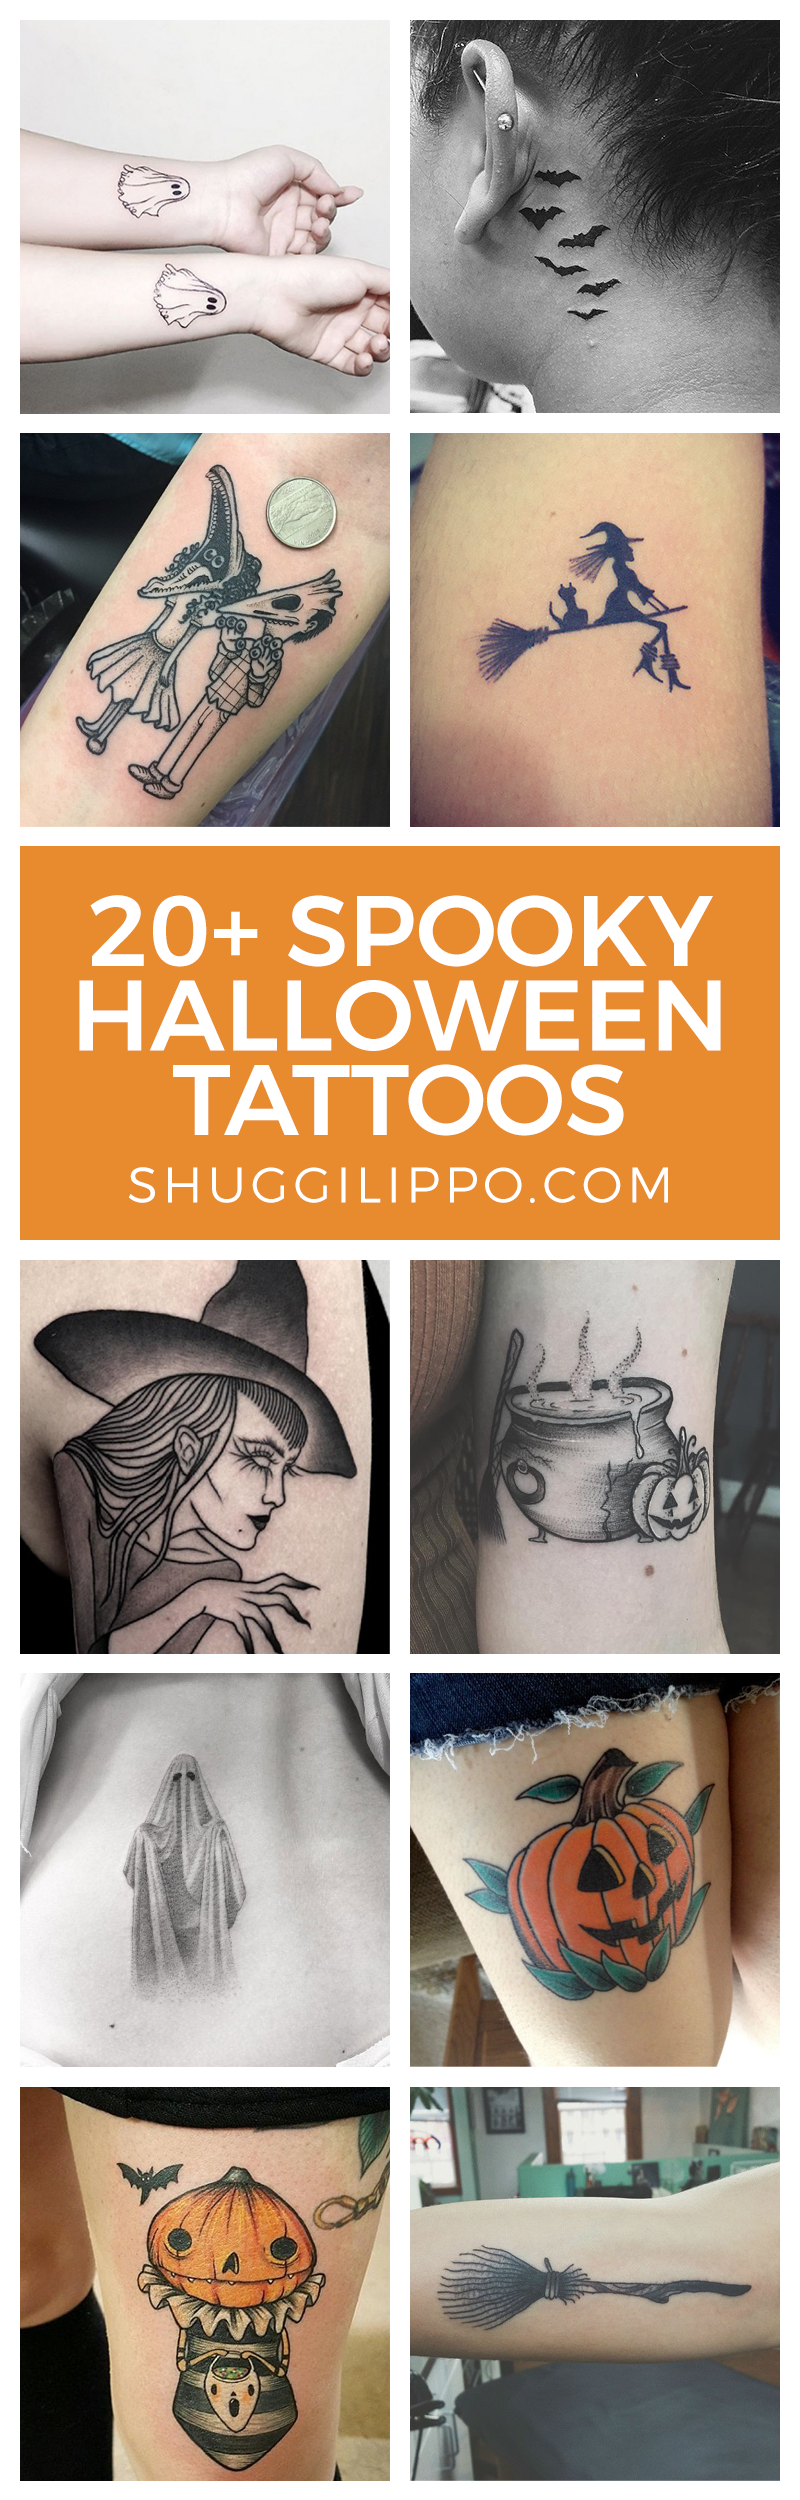 I love Halloween and I love tattoos. These 21 halloween tattoos are total inspiration for if I ever get up the guts to get my love for Halloween tattooed on my body.